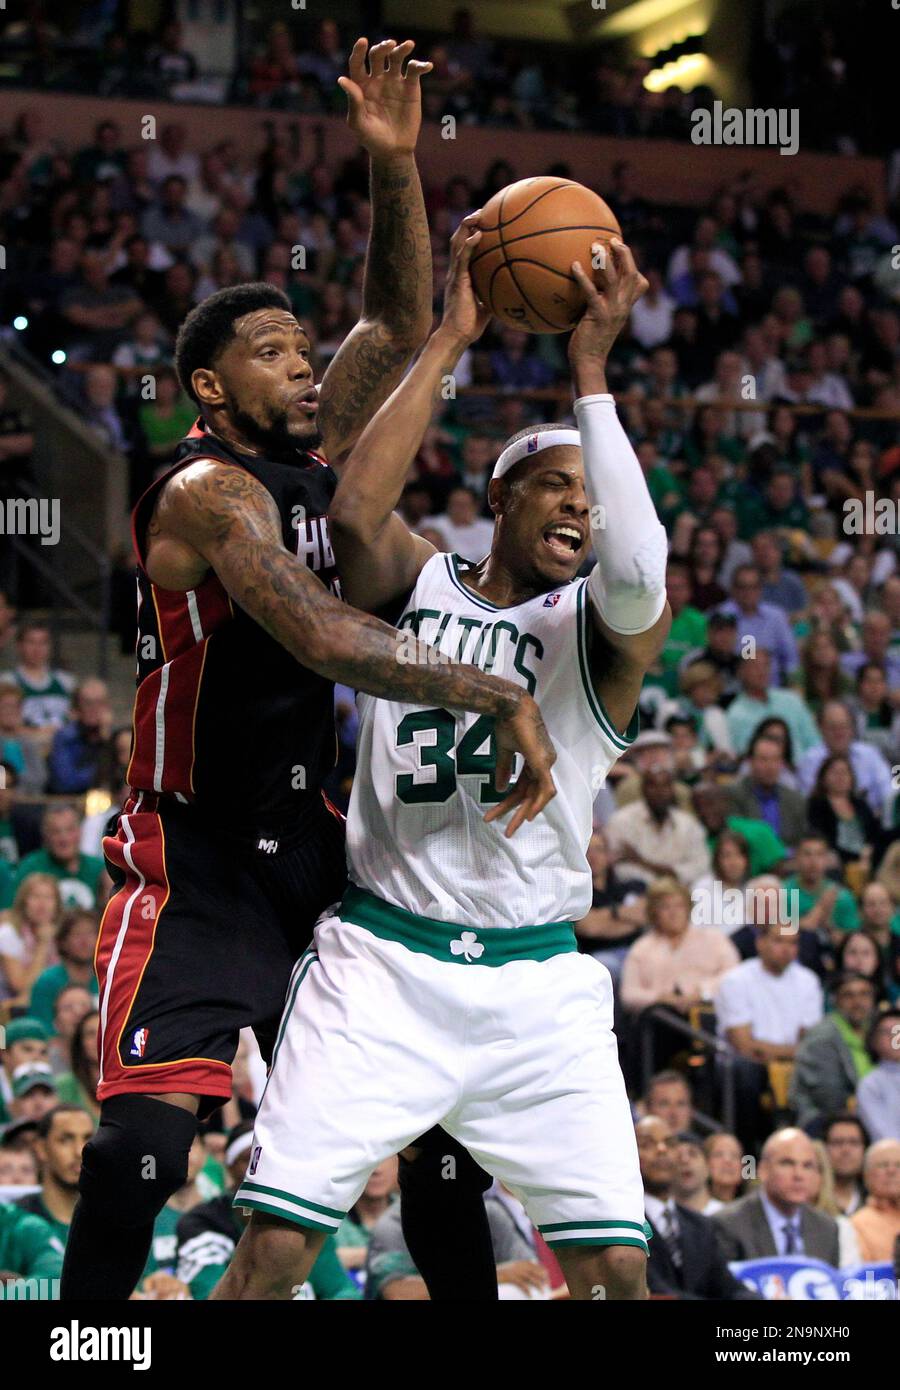 Miami Heat forward Udonis Haslem, left, defends against Boston Celtics forward Paul Pierce (34) during the fourth quarter of Game 3 in their NBA basketball Eastern Conference finals playoff series in Boston Friday, June 1, 2012. Boston won 101-91. (AP Photo/Elise Amendola) Stock Photo